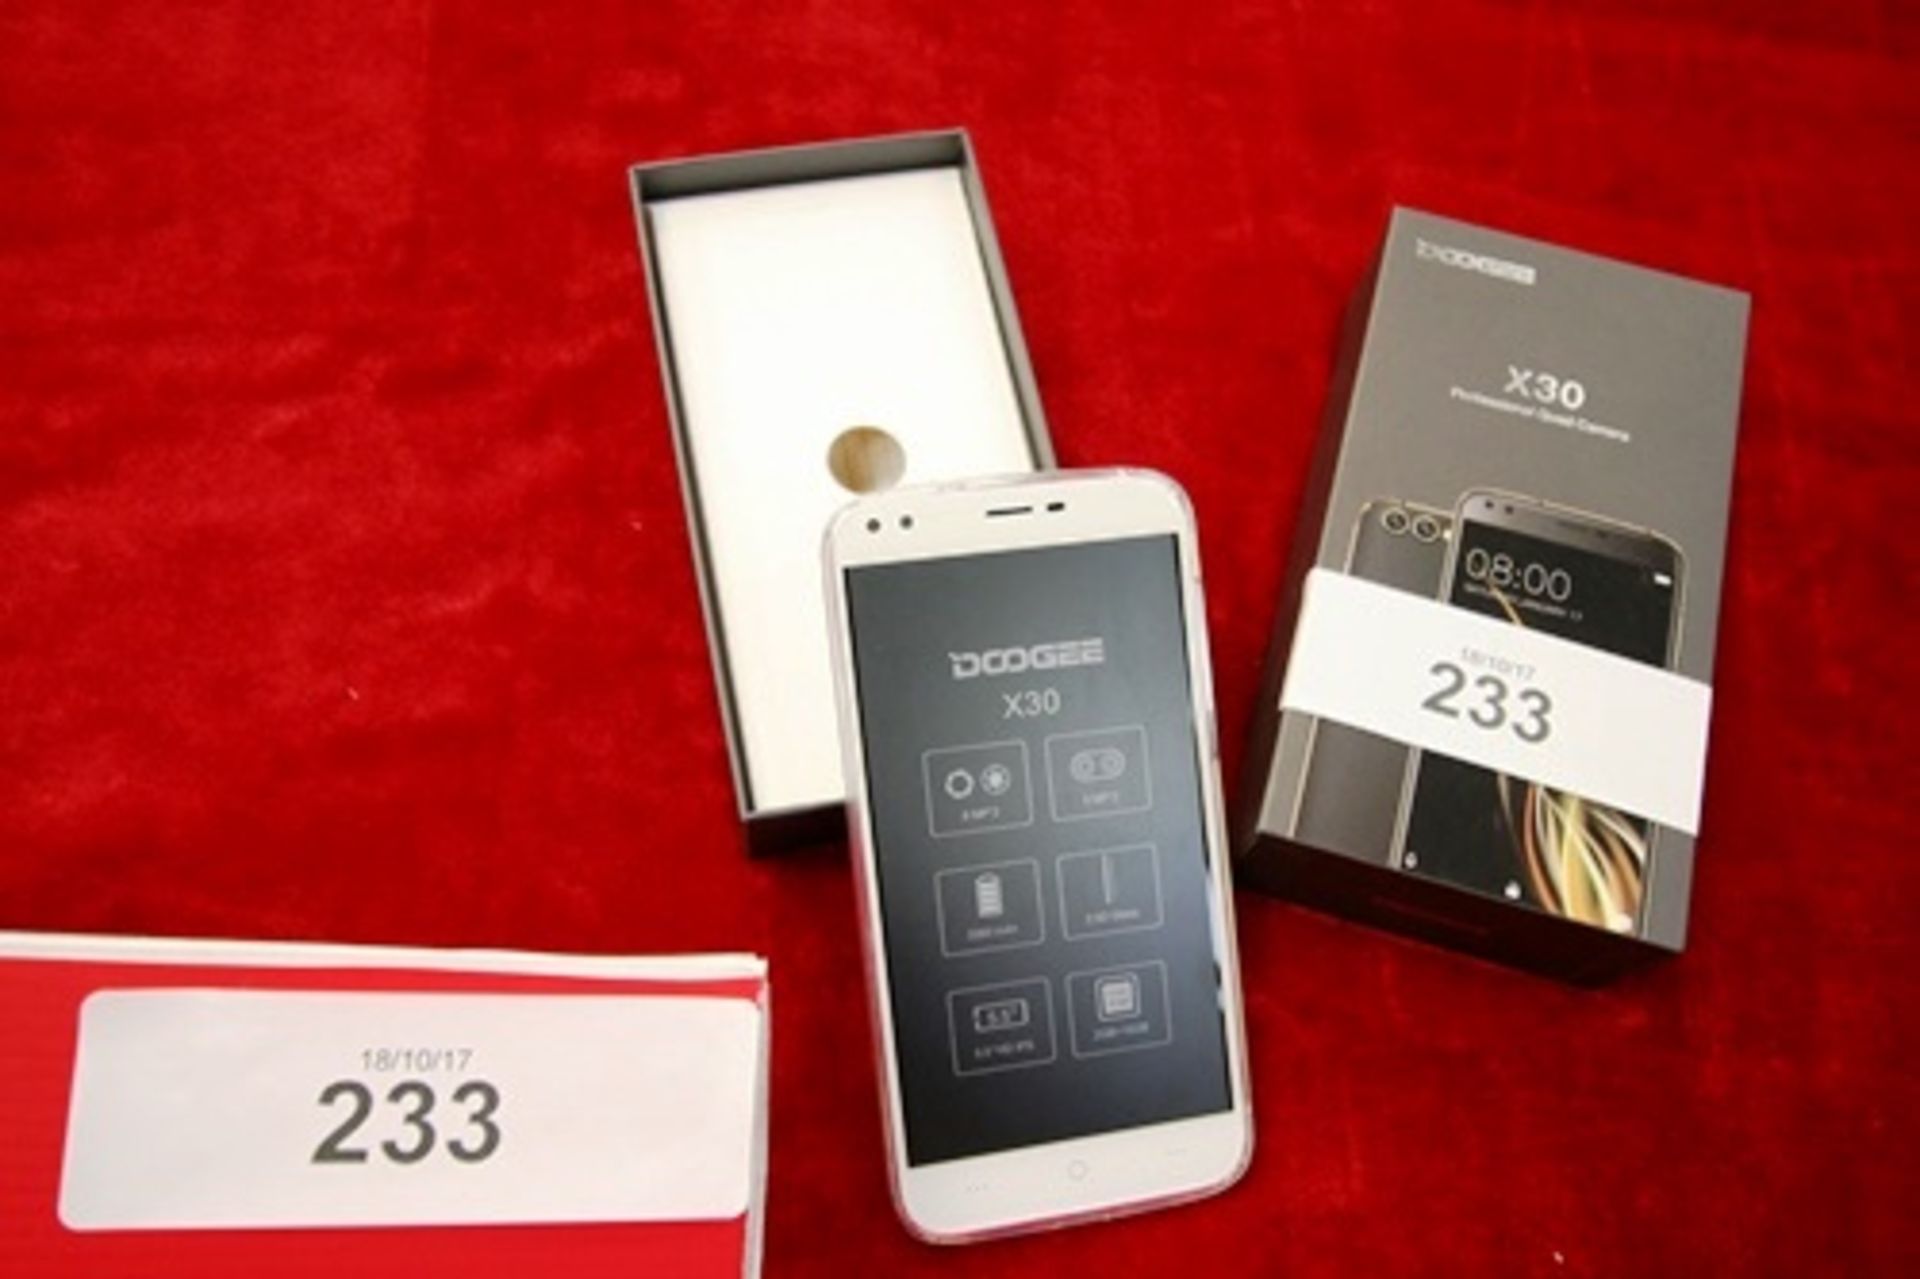 A Doogee X30 5.5" smart phone, 16gb, with professional quad camera, IMEI 351545090014191 and